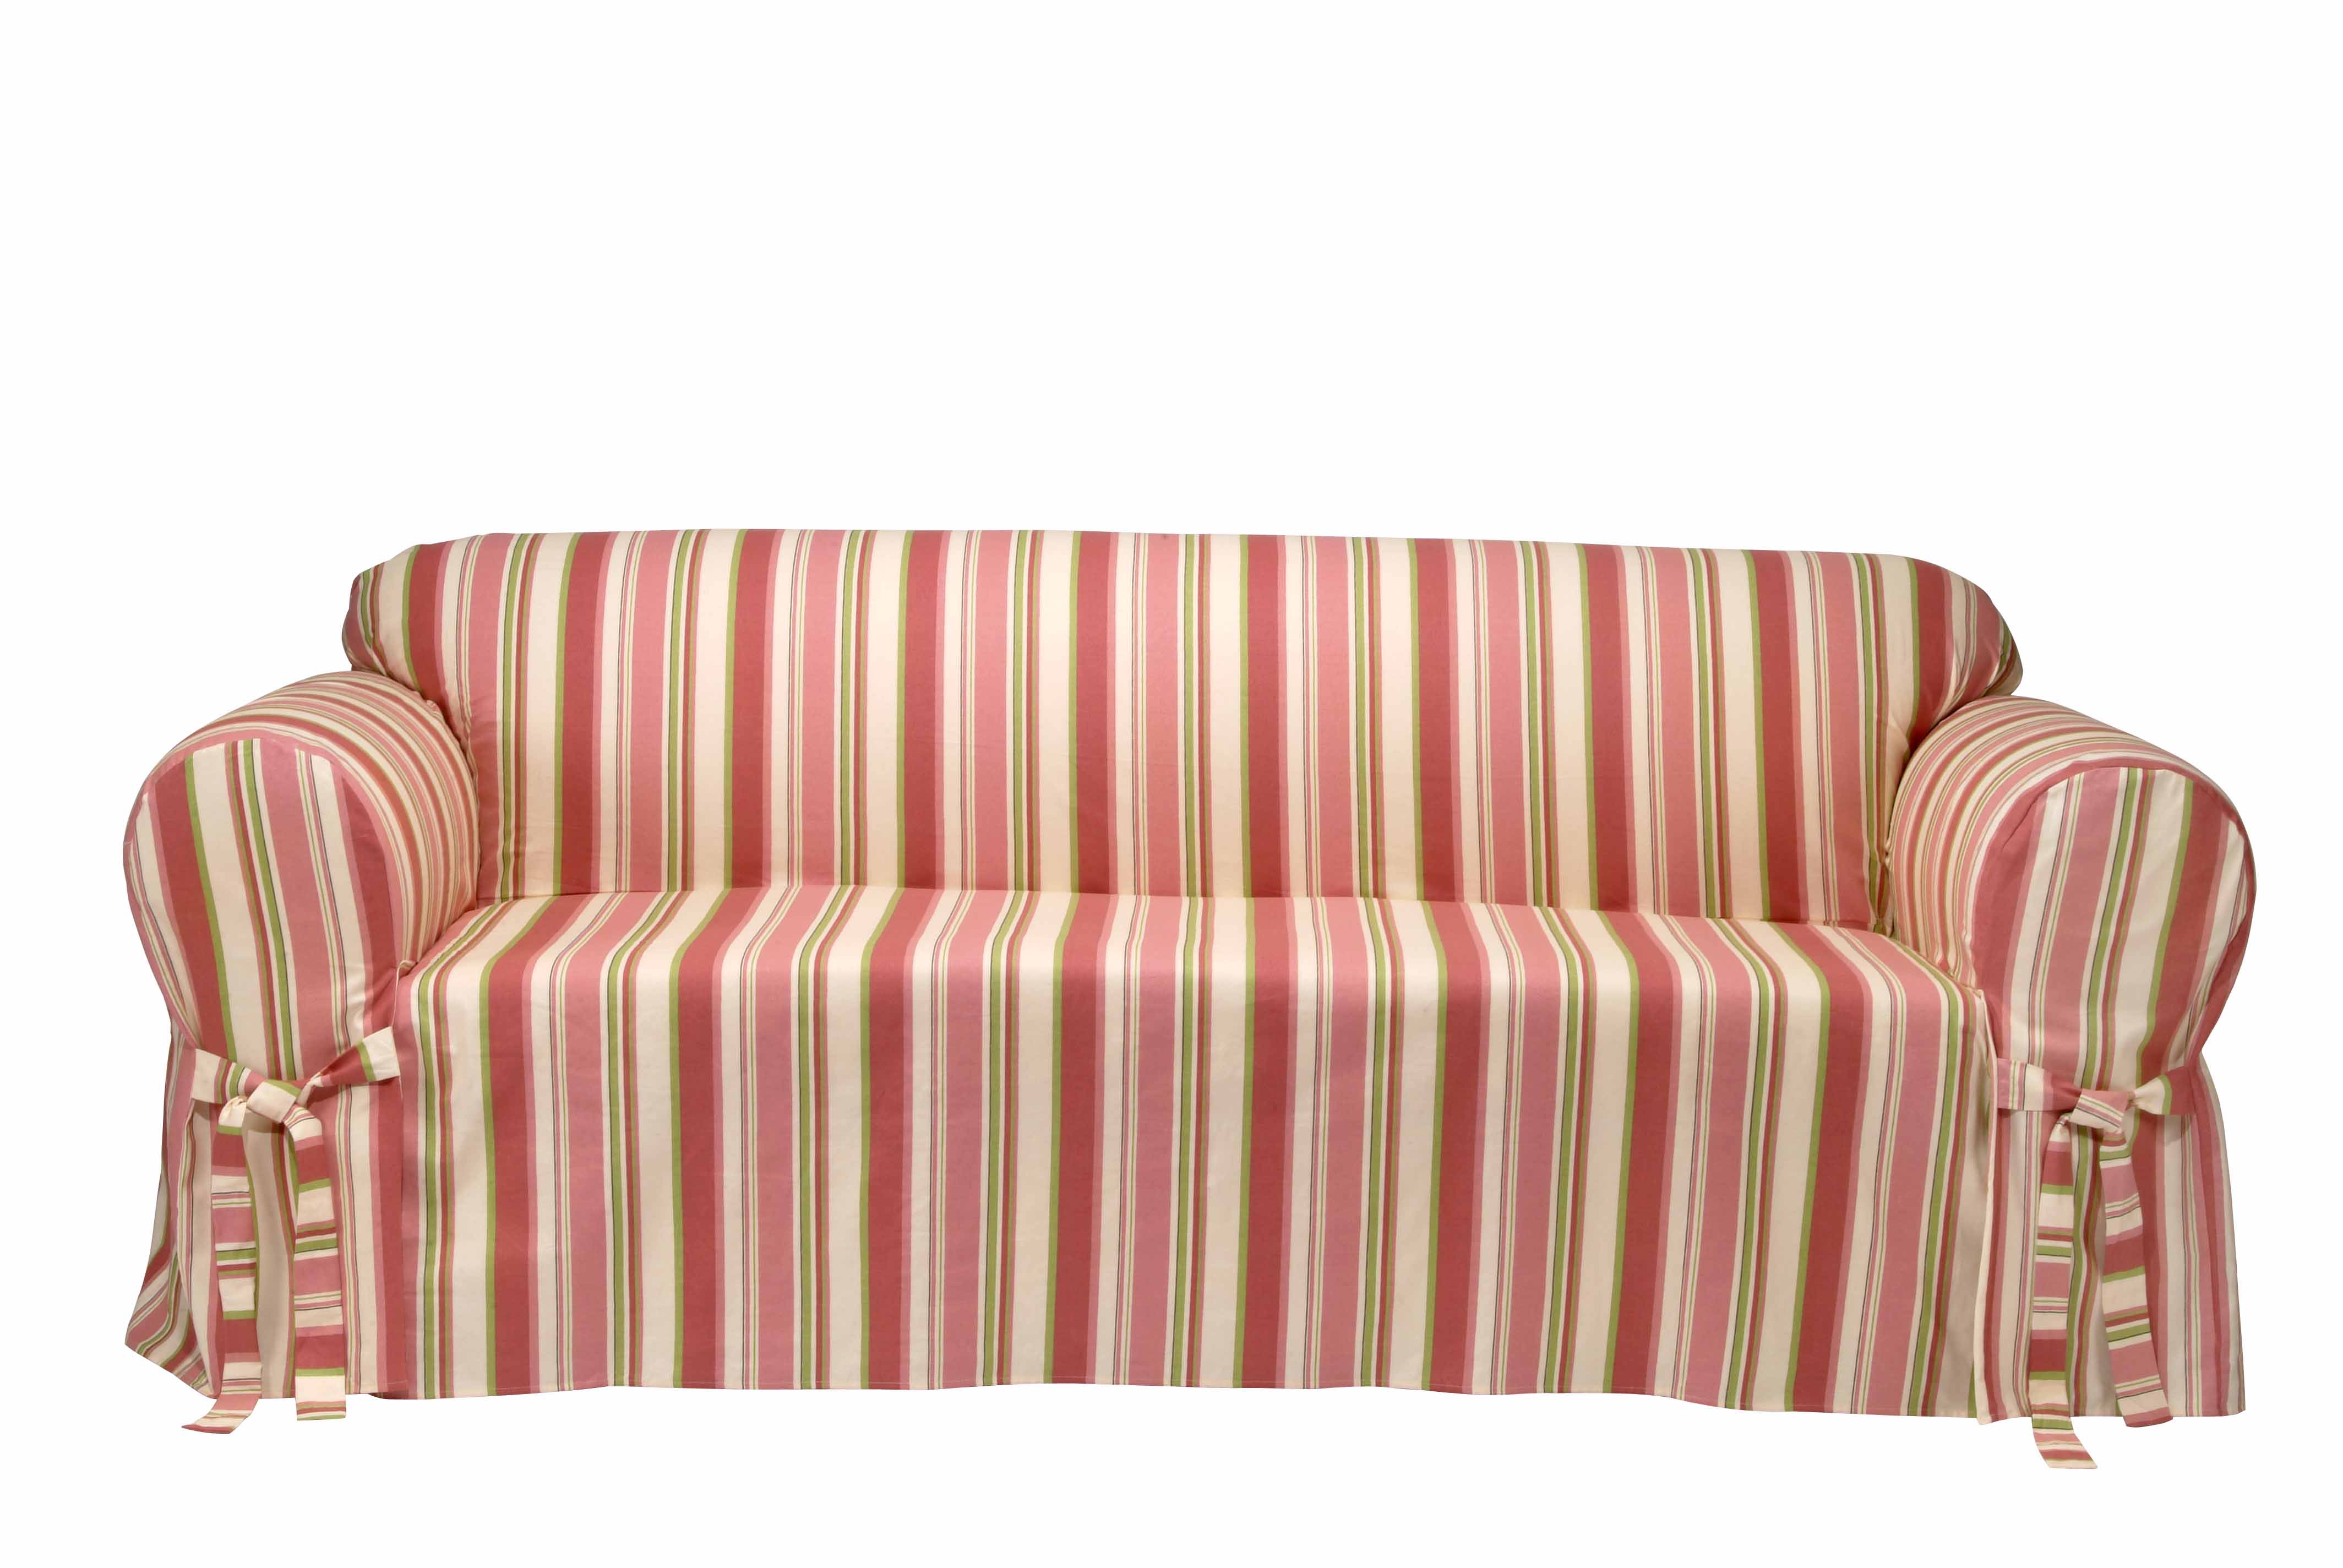 Country Stripe Loveseat Slipcover - Free Shipping Today - Overstock.com ...